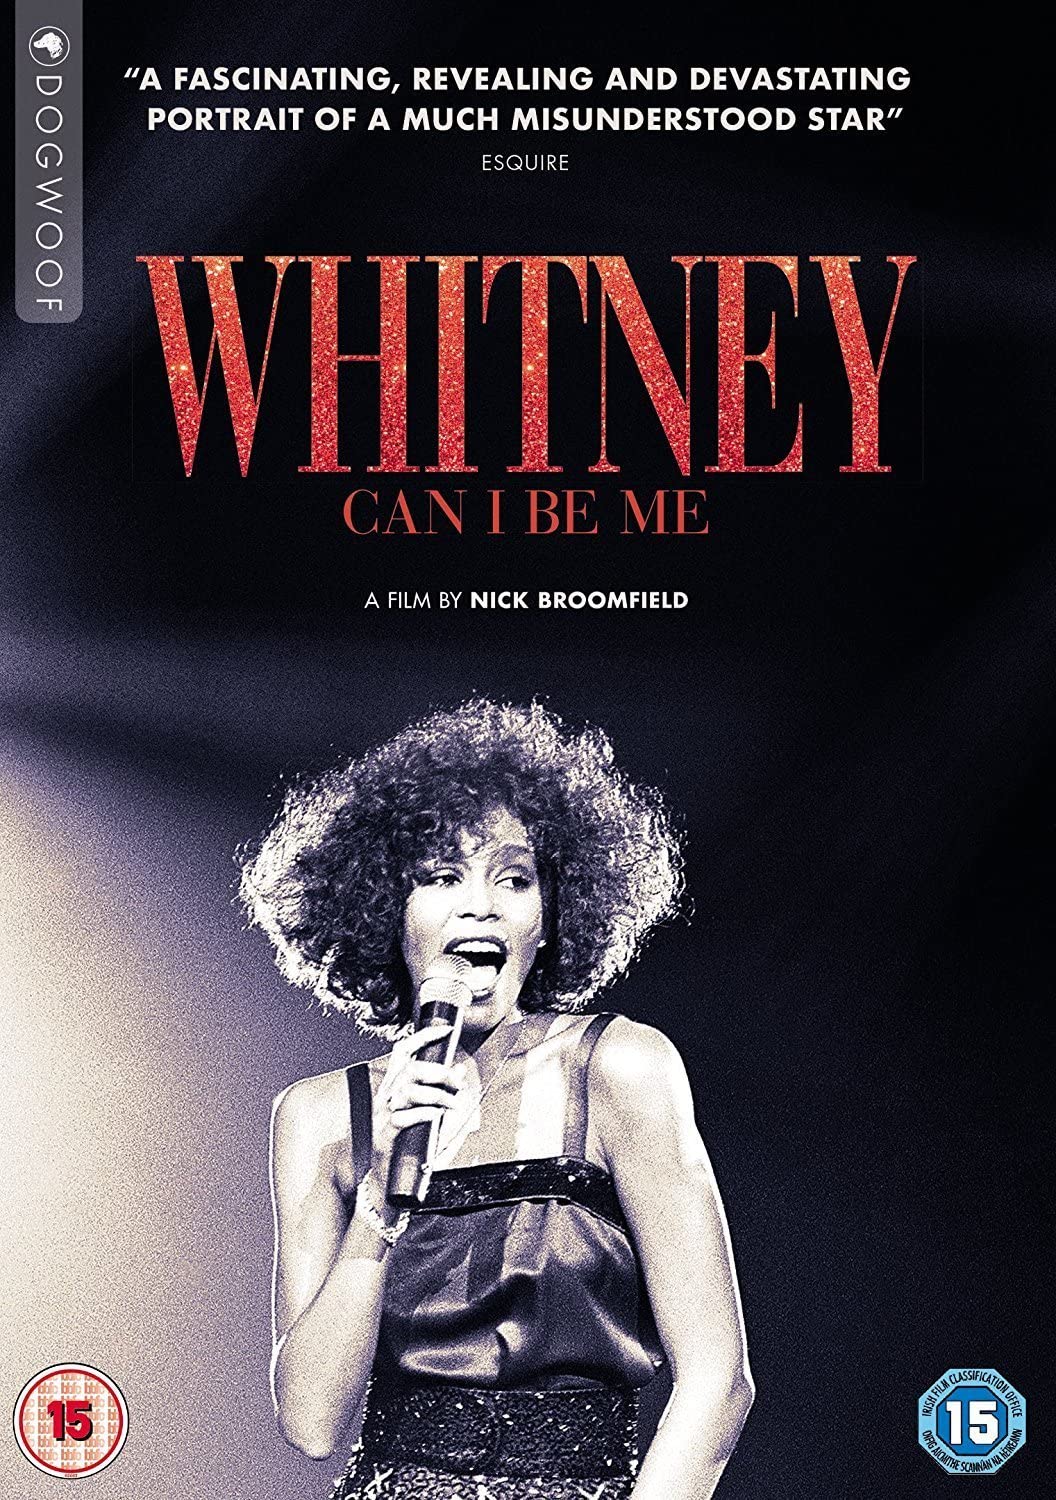 Whitney 'Can I Be Me' - Documentary/Music [DVD]